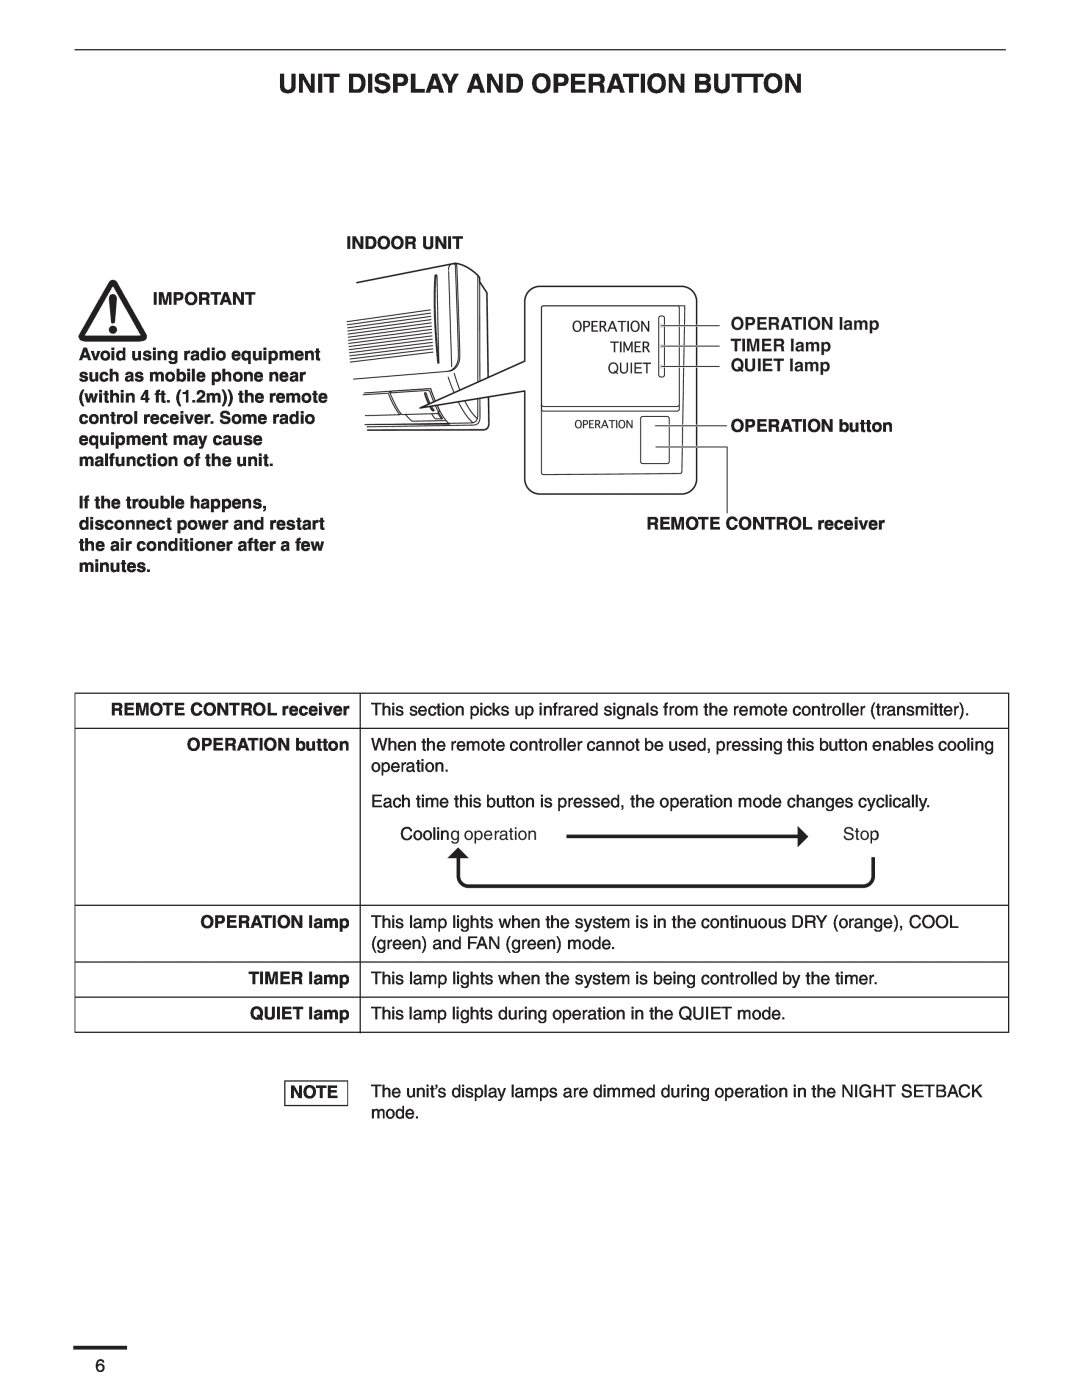 Panasonic CS-MKS9NKU, CS-MKS24NKU, CS-MKS18NKU service manual Unit Display And Operation Button 